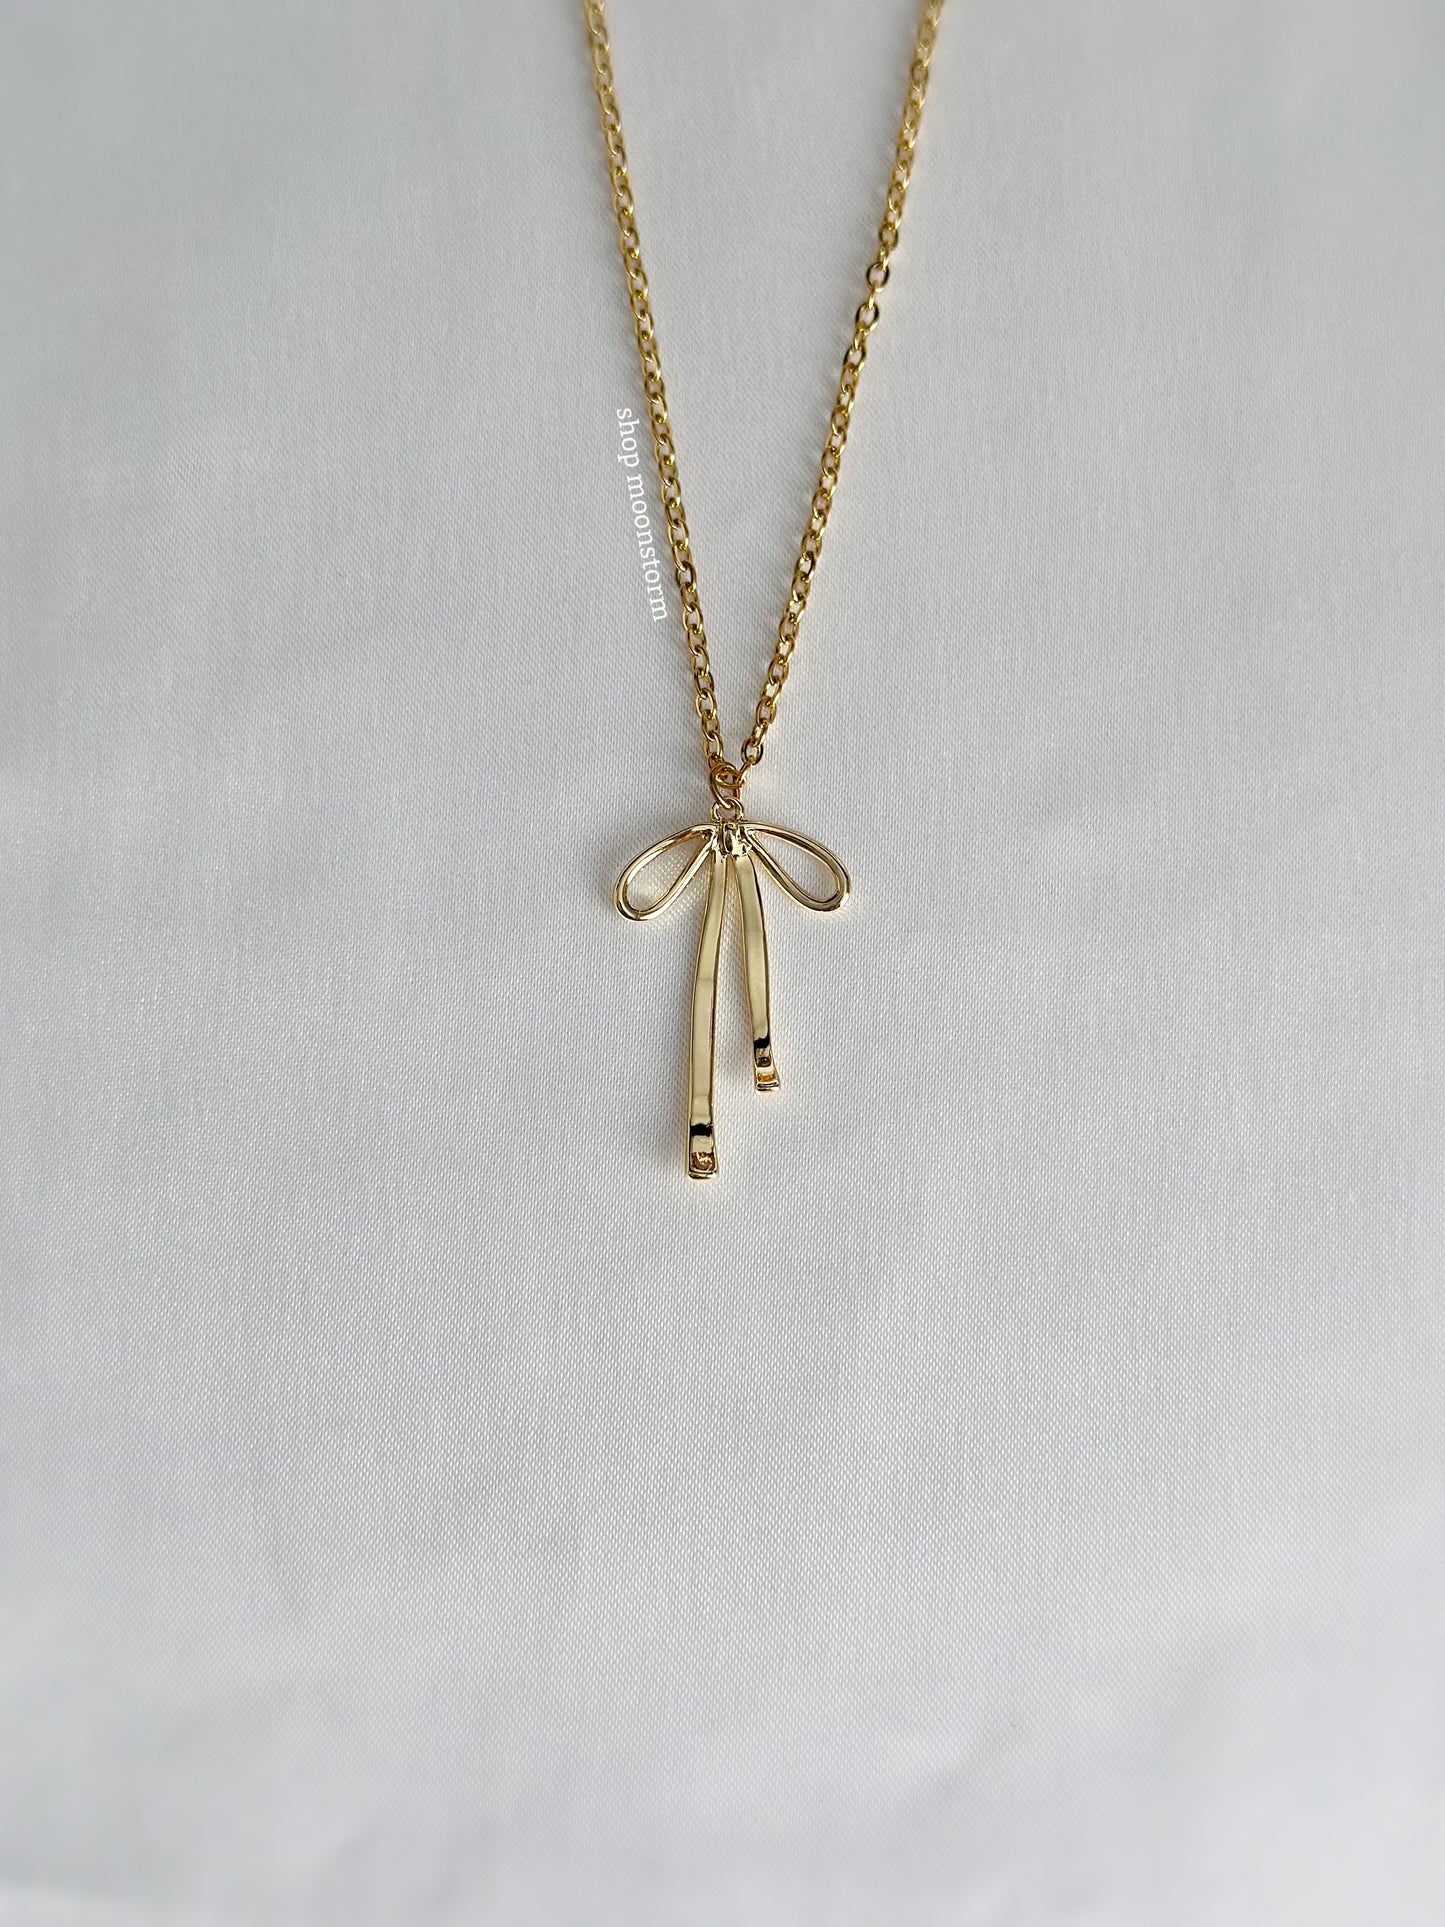 Belle Ribbon Bow Necklace (Gold Version)